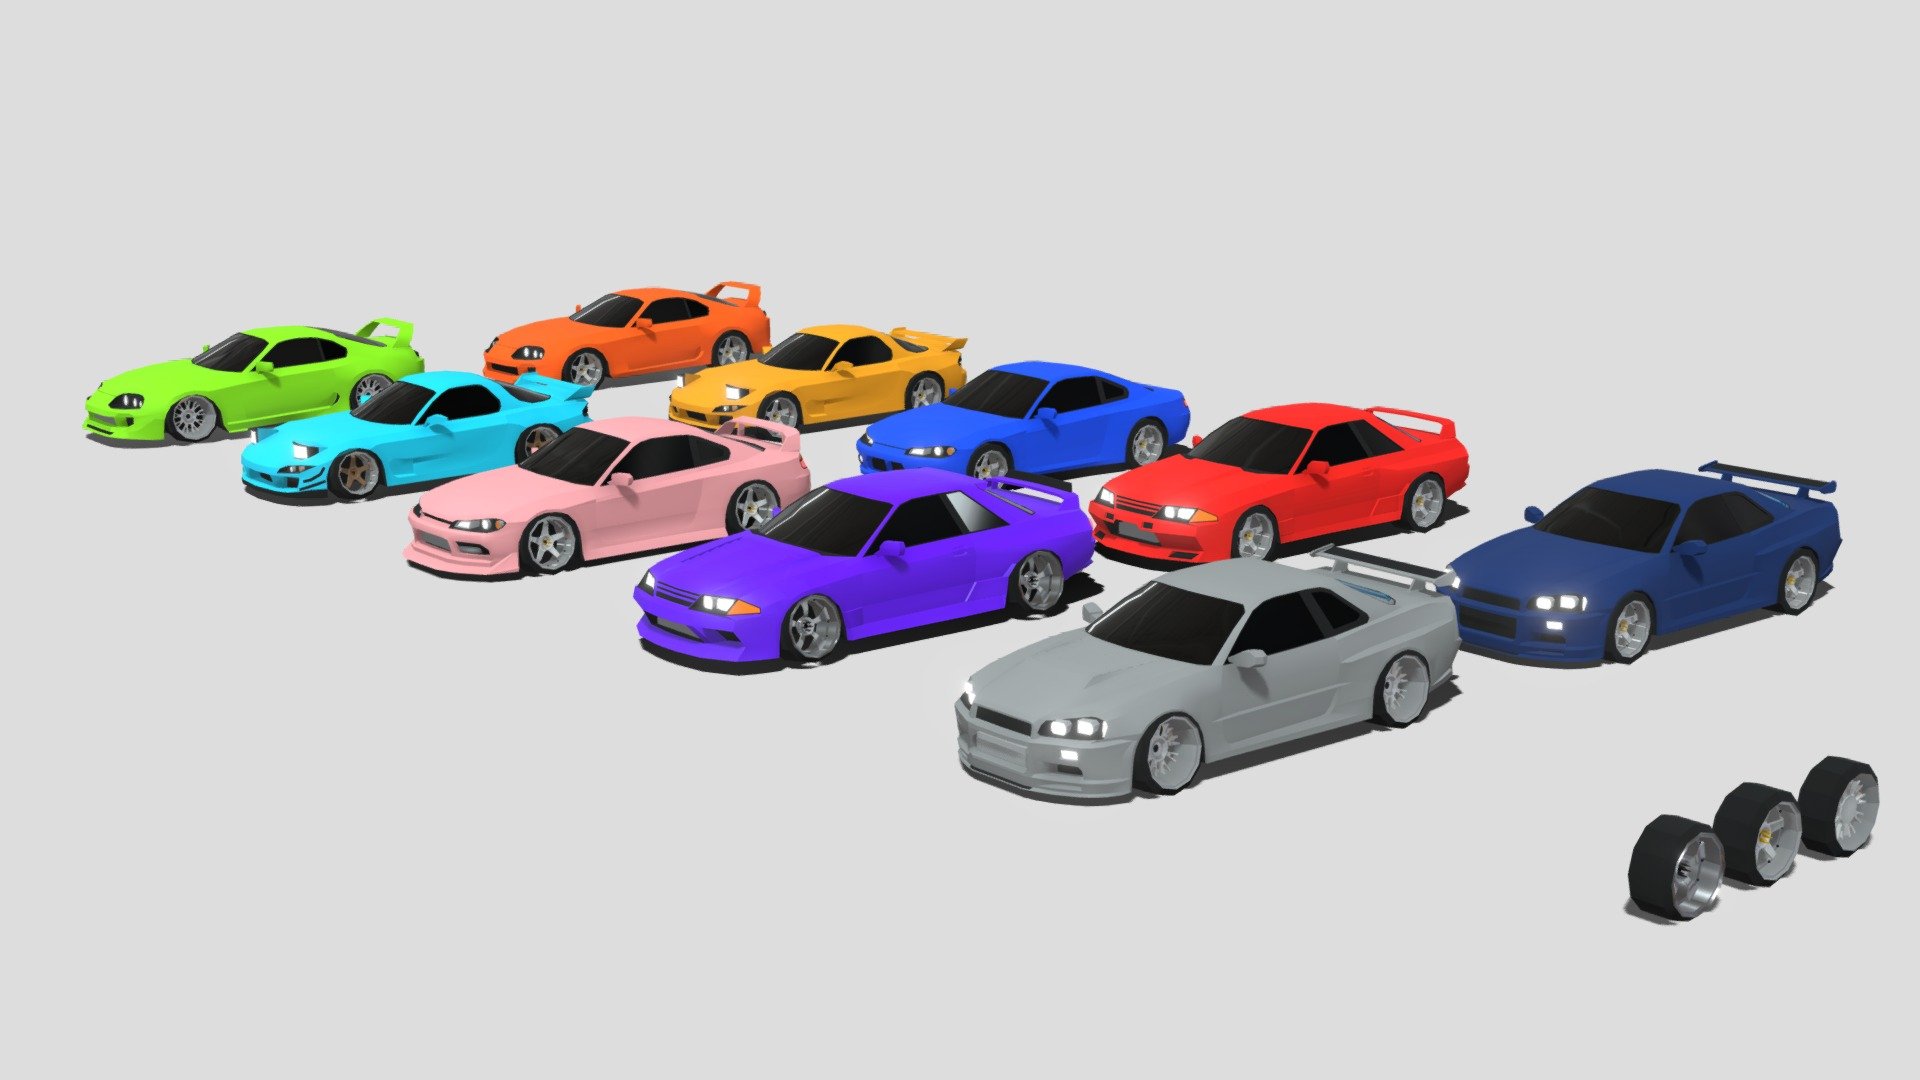 This pack contains 5 Low-Poly Retro Tuner and Drift Japanese Cars ready for your games, animations, and renders. Features R34 Nissan GTR, R32 Nissan GTR, S15 Nissan Silvia, FD Mazda RX-7, and Toyota Supra. Each car also has a modified version. This pack also contains 3 different rims as a bonus 3d model